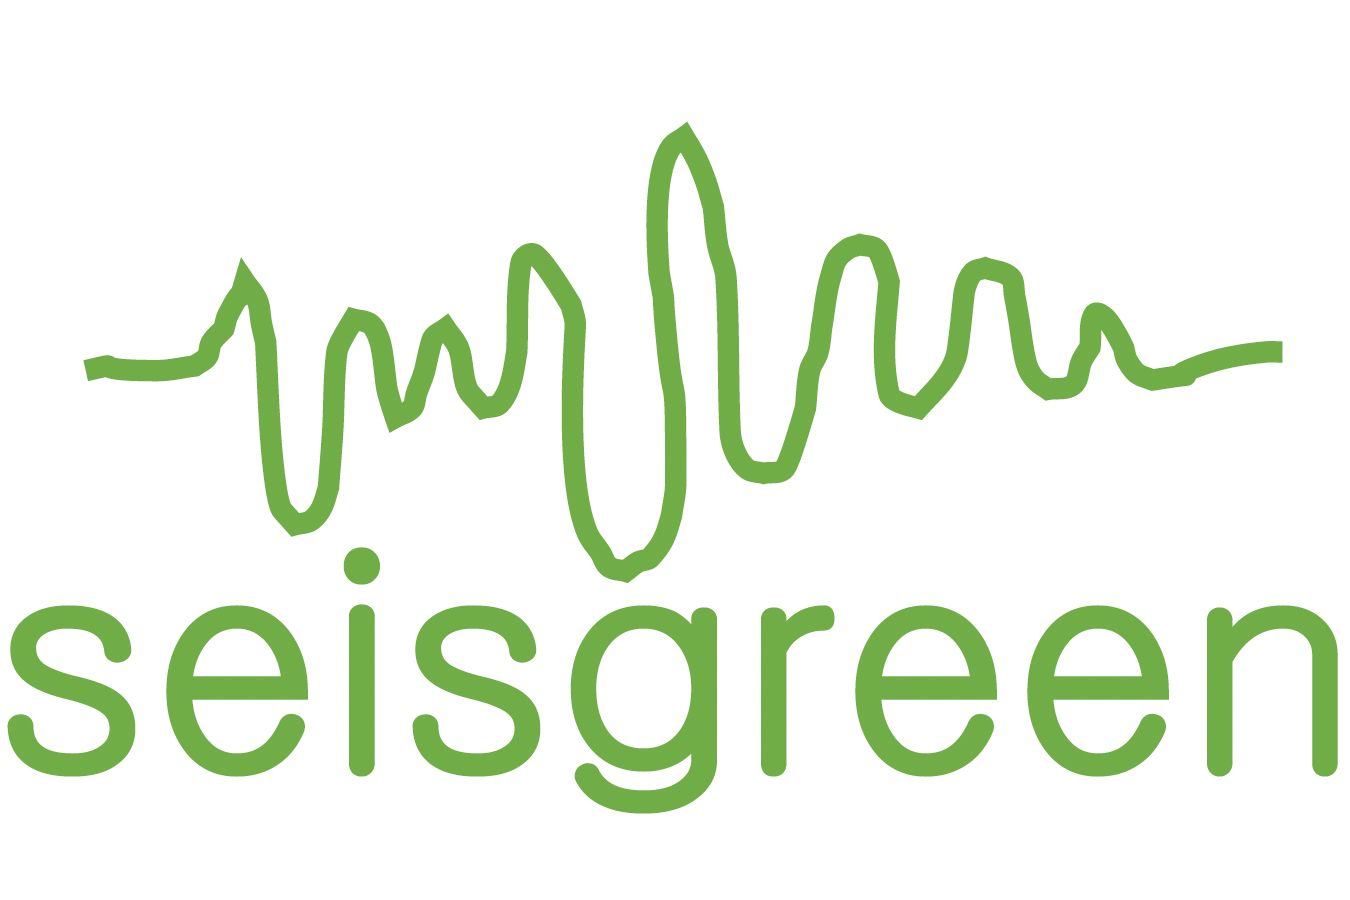 Logo for Seisgreen Imperial Earth Science and Engineering research project, seismic, geothermal